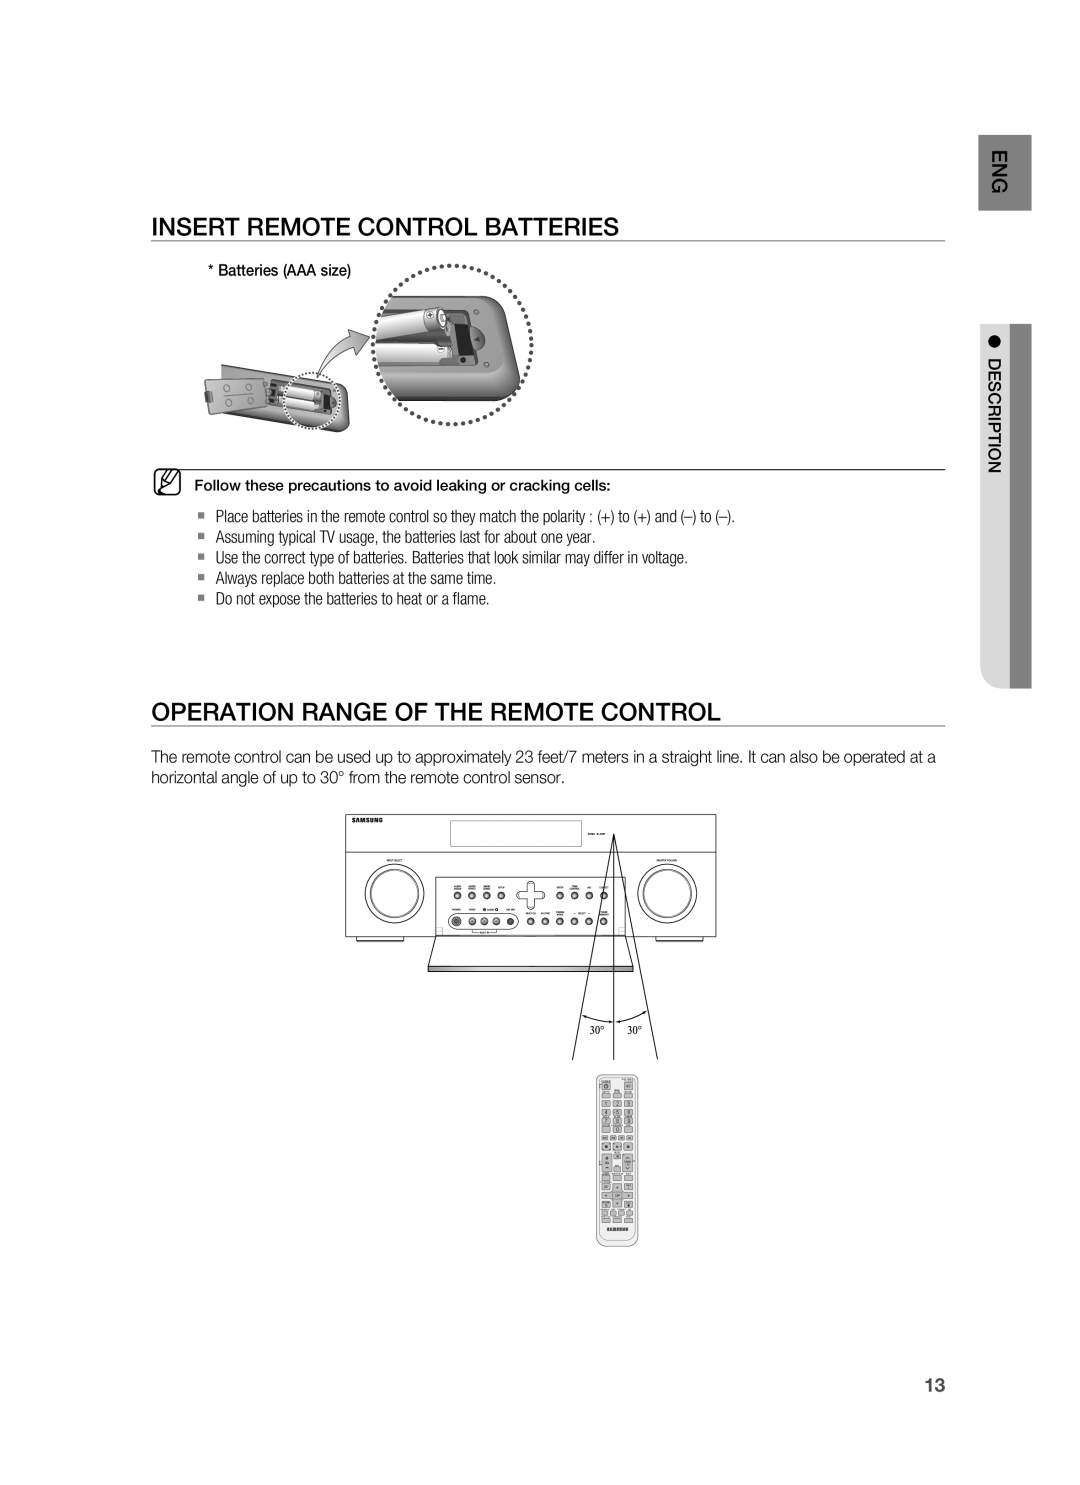 Samsung HW-C900-XAA user manual Insert Remote Control Batteries, Operation Range Of The Remote Control 